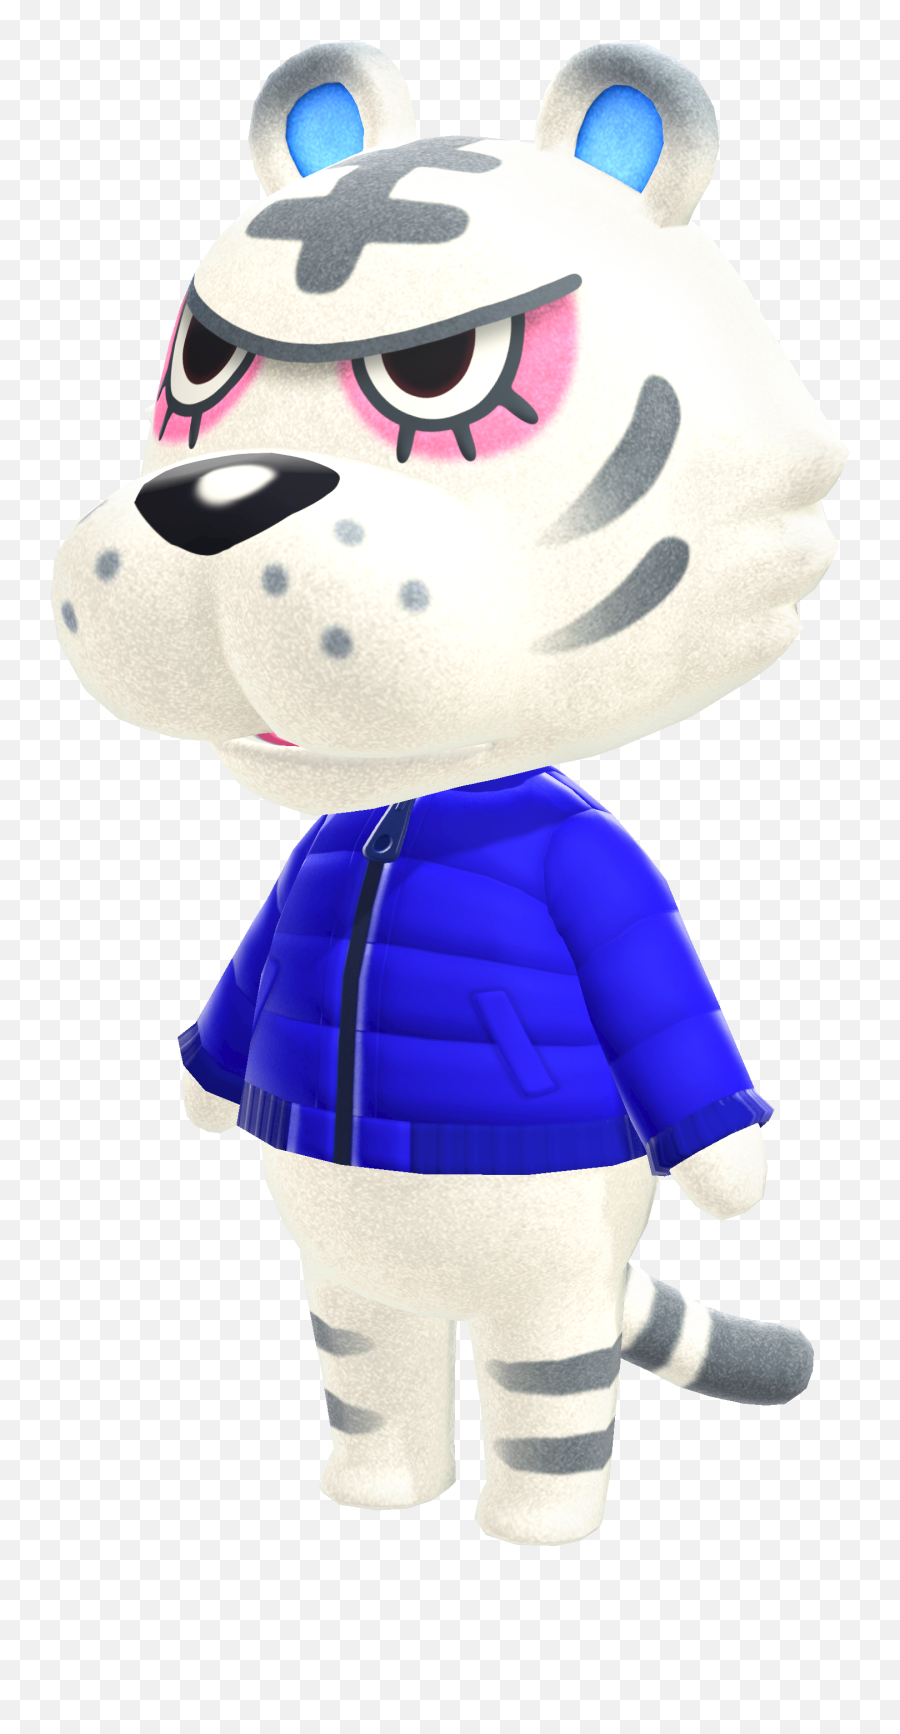 Rolf Animal Crossing Item And Villager Database - Villagerdb Tiger Villager Animal Crossing Png,Animal Crossing Transparent